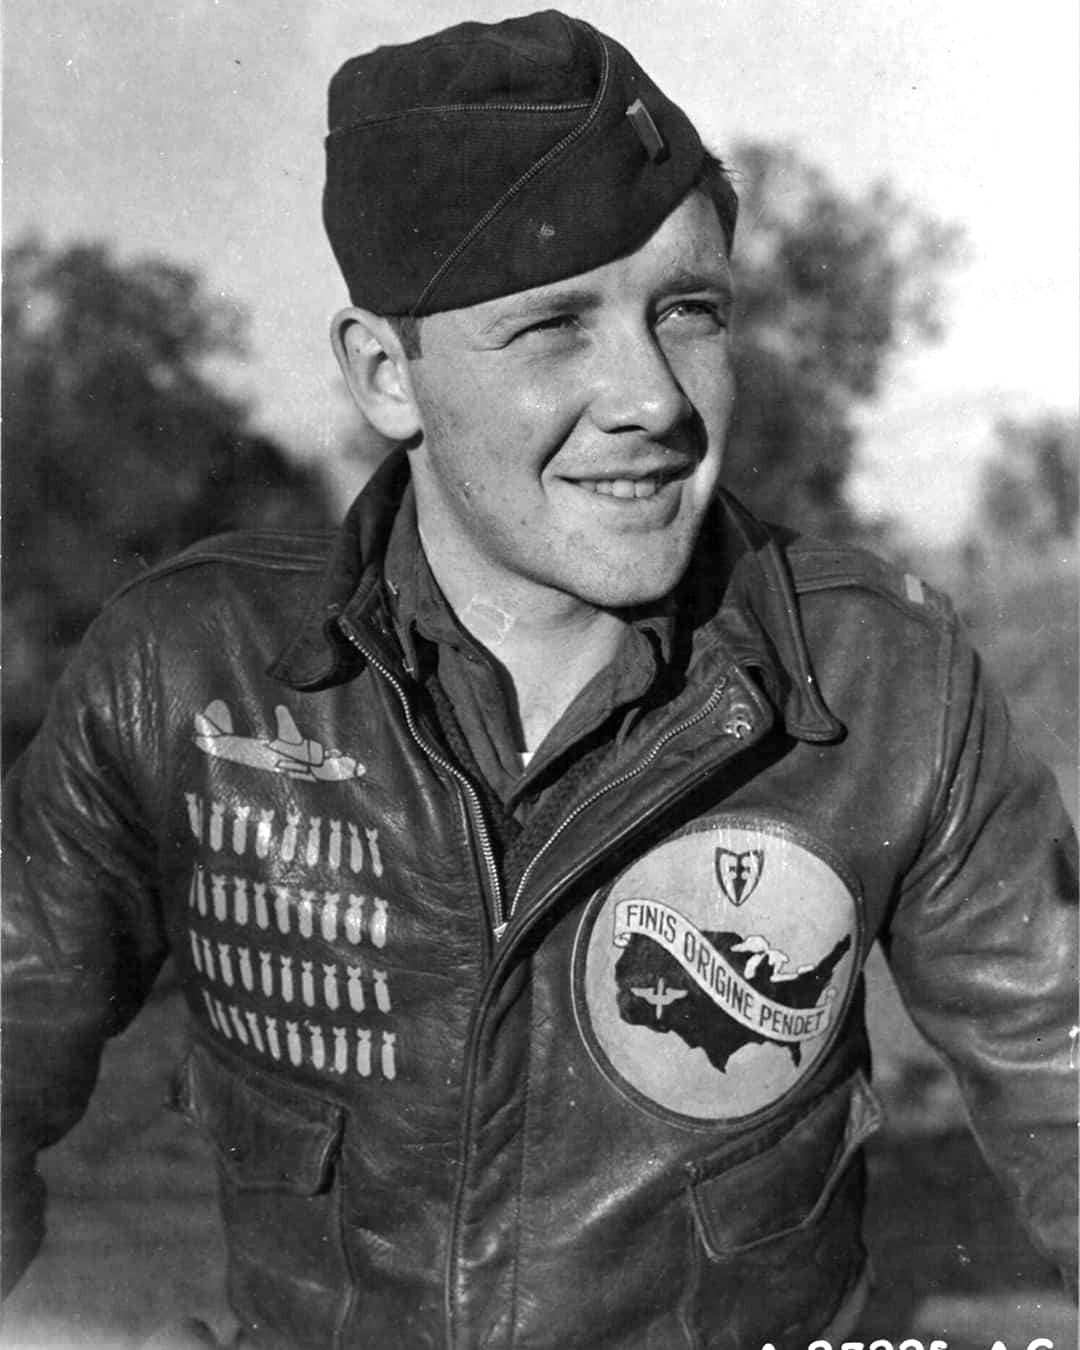 Nice period photos of A-2's | Page 22 | Vintage Leather Jackets Forum